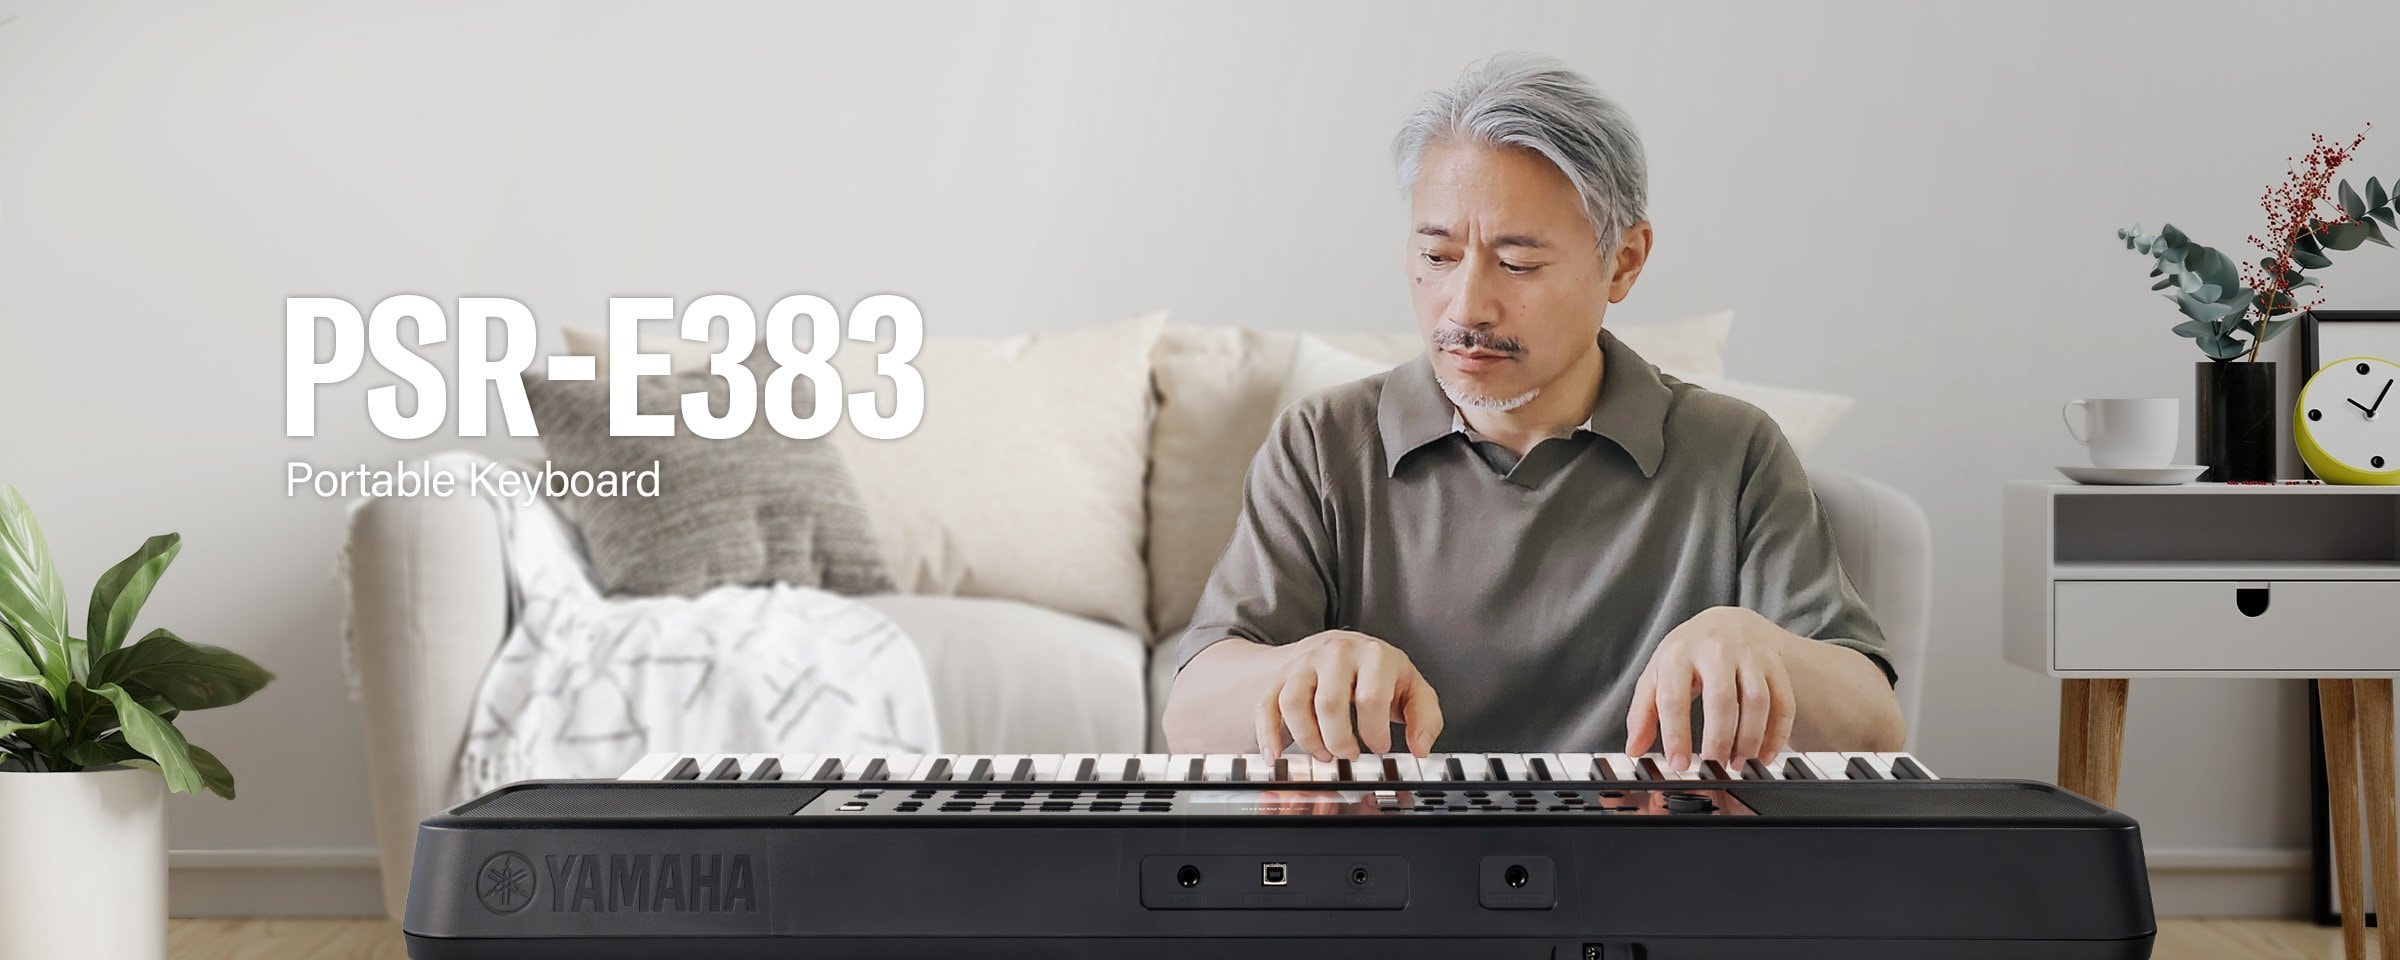 The man is playing the PSR-E383 enthusiastically.